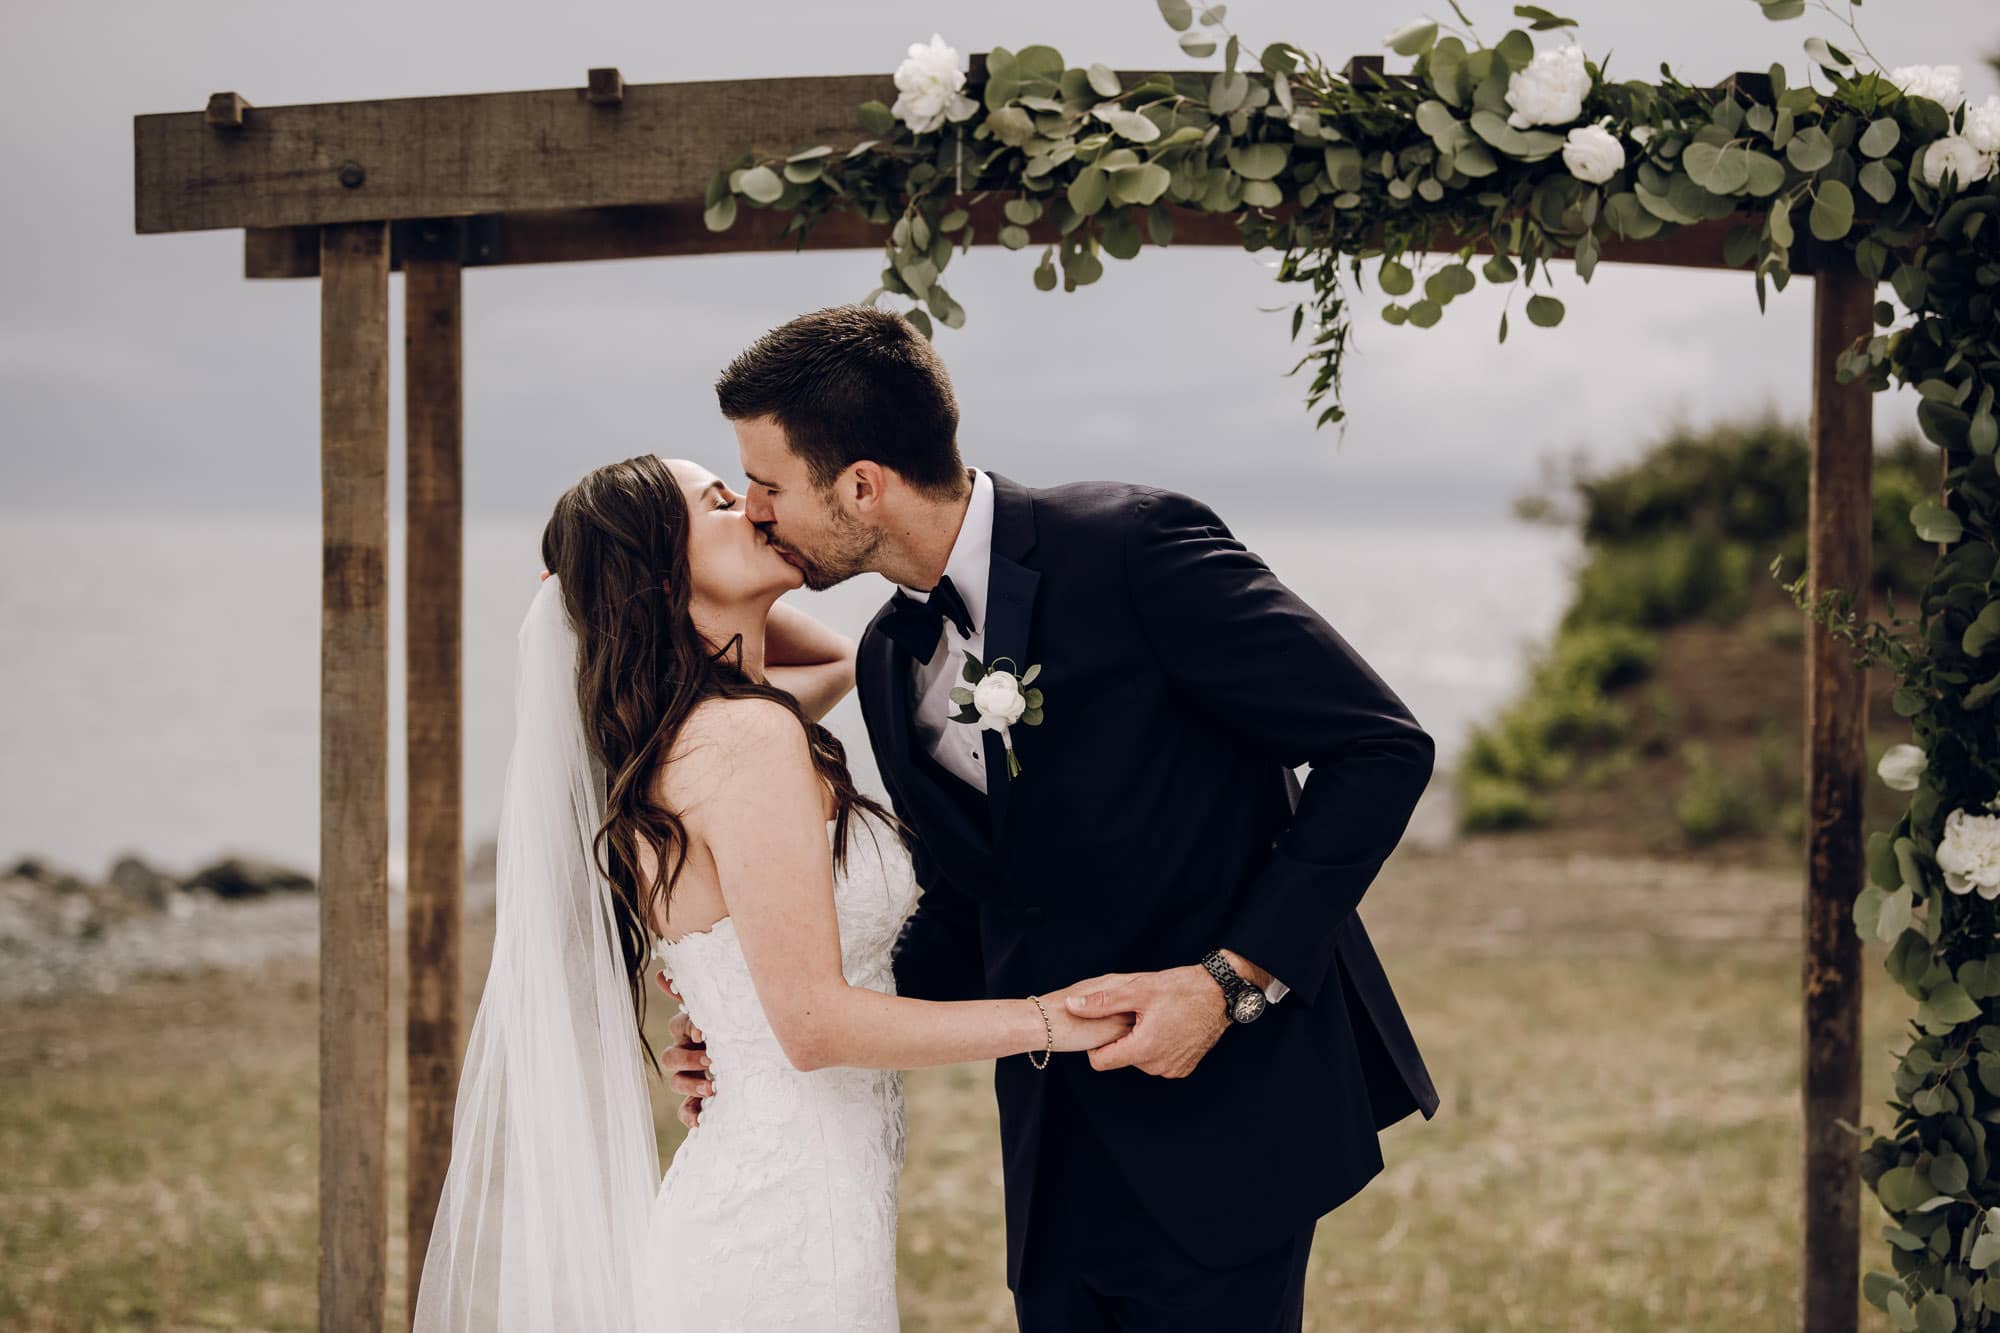 Airbnb-Elopement-Sooke-BC-Otter-Point-Weddings-Intimate-19